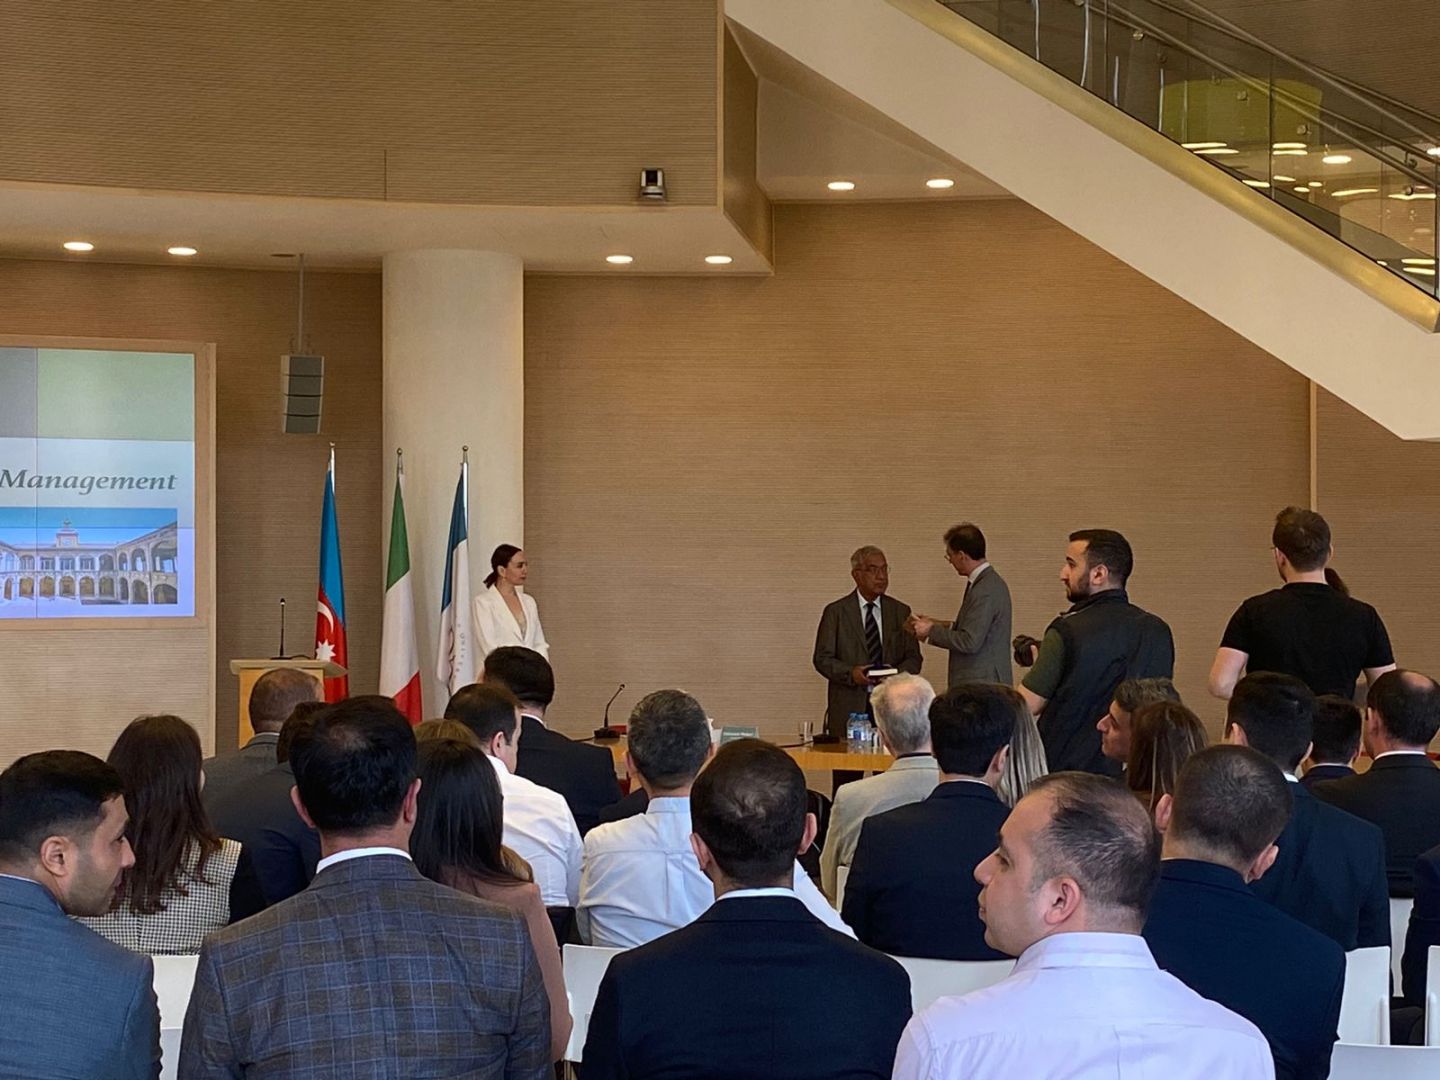 Azerbaijani & Italian universities initiate joint certificate program in agriculture and food system management [PHOTOS]